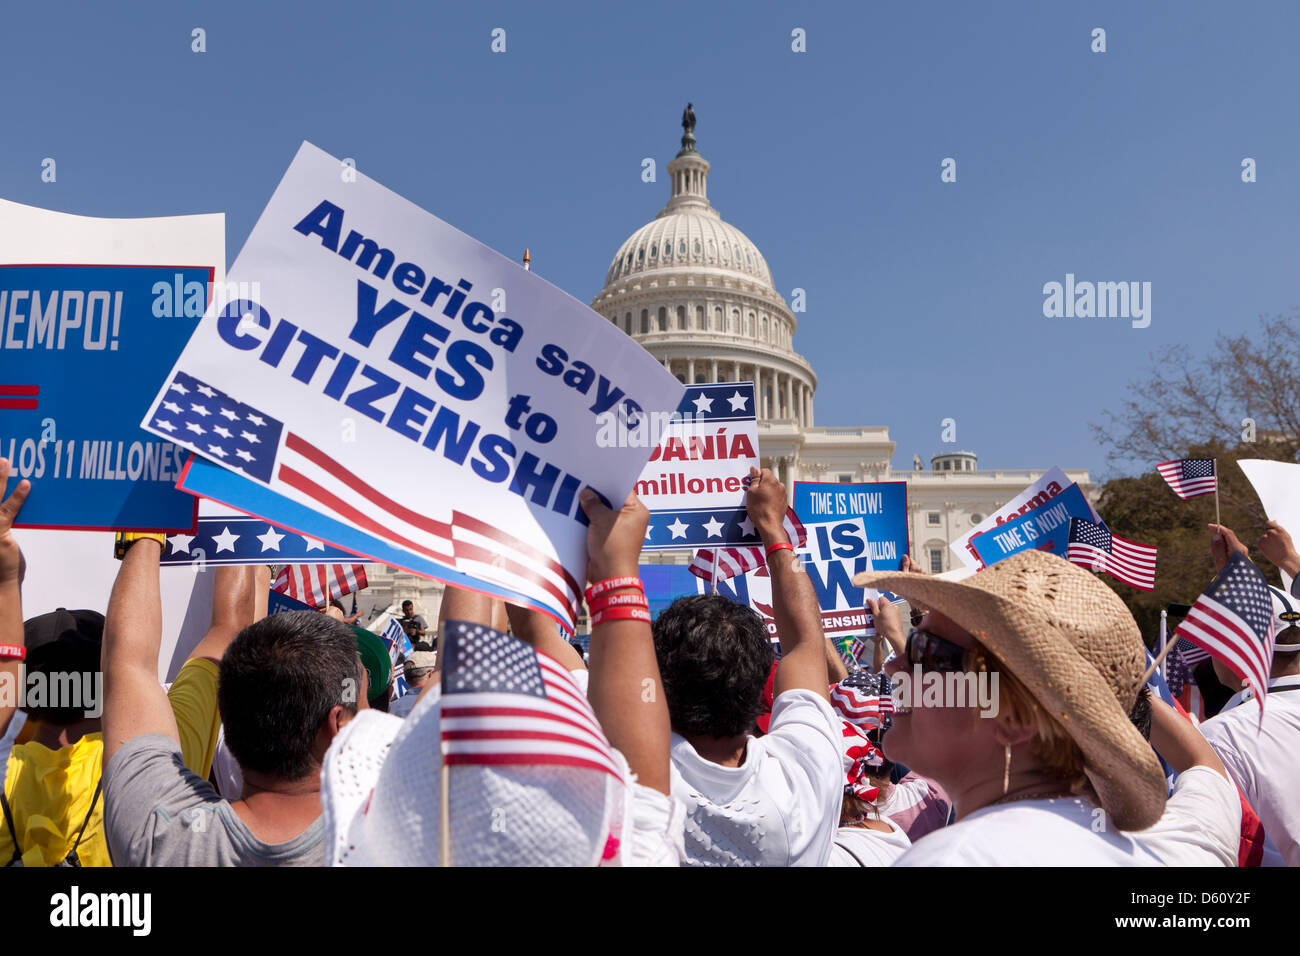 Large crowd waving Mexican and American flags at an immigration rally in Washington DC Stock Photo